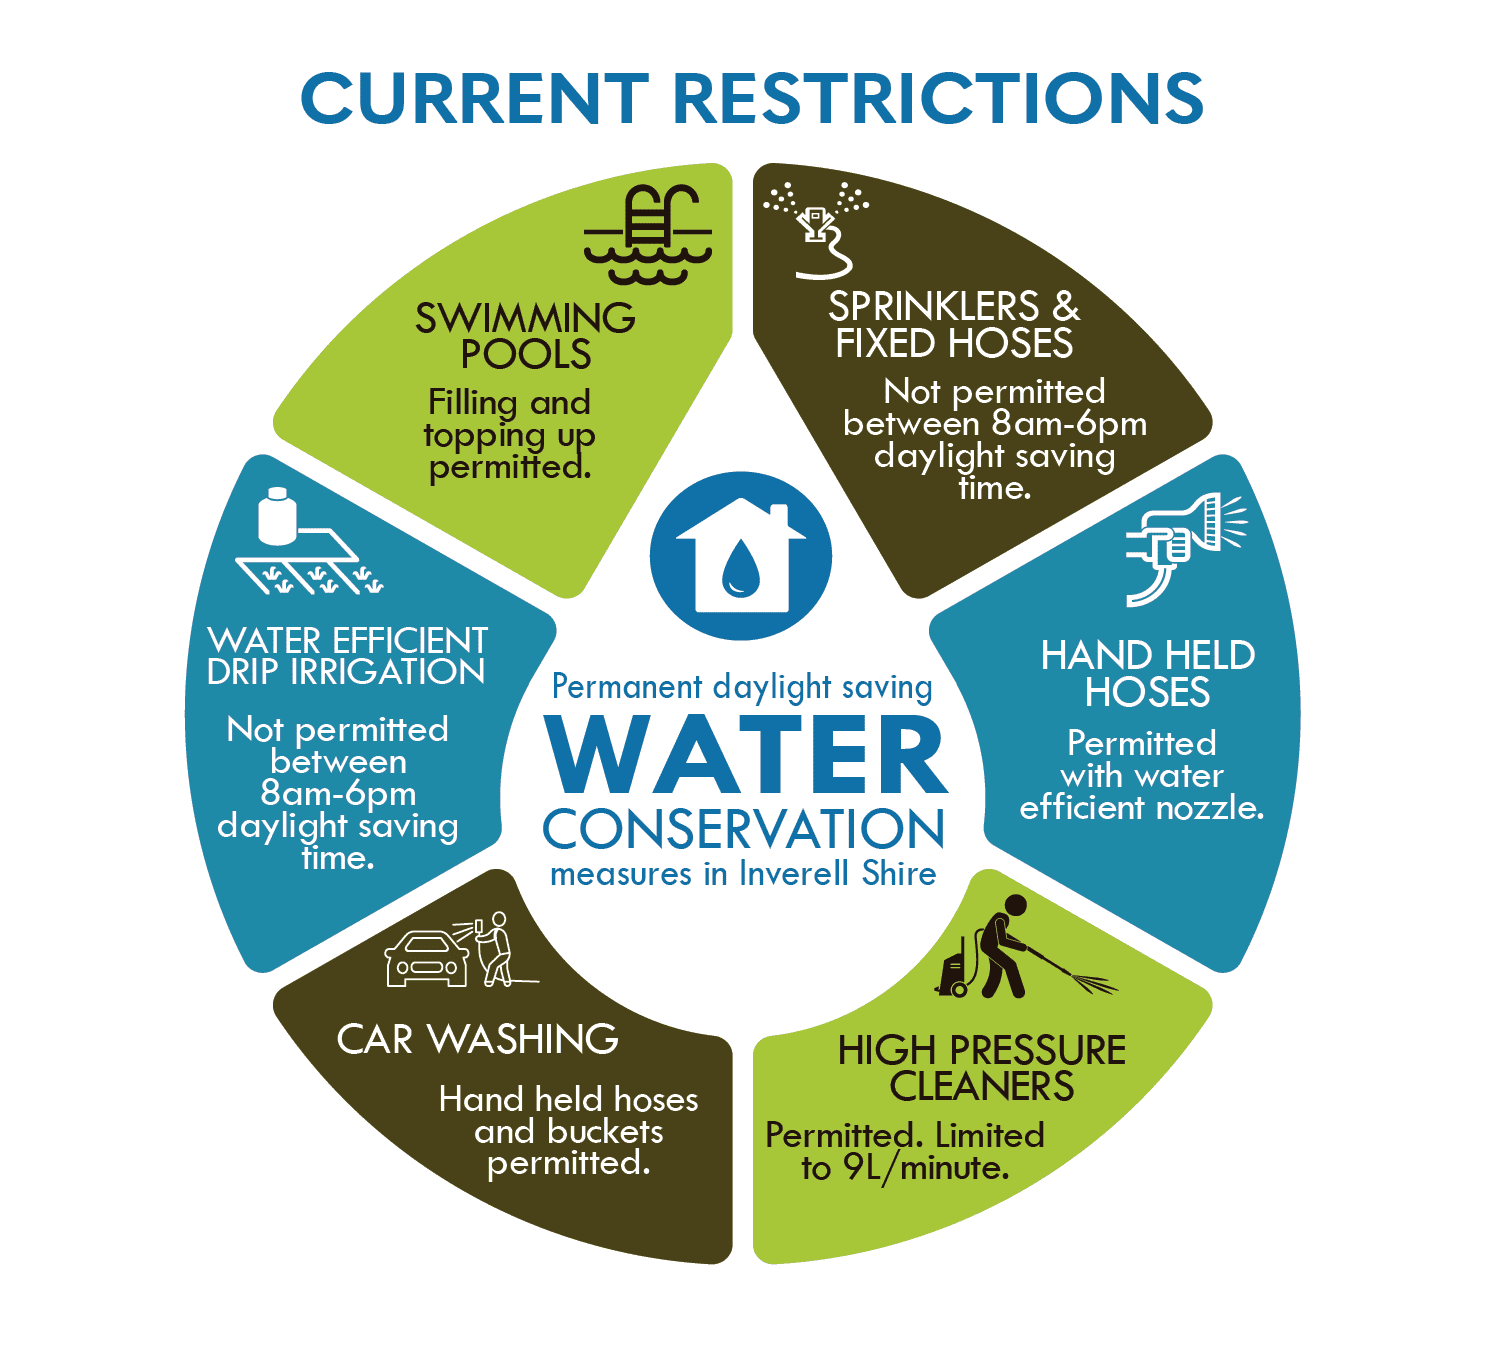 Water Conservation Plan